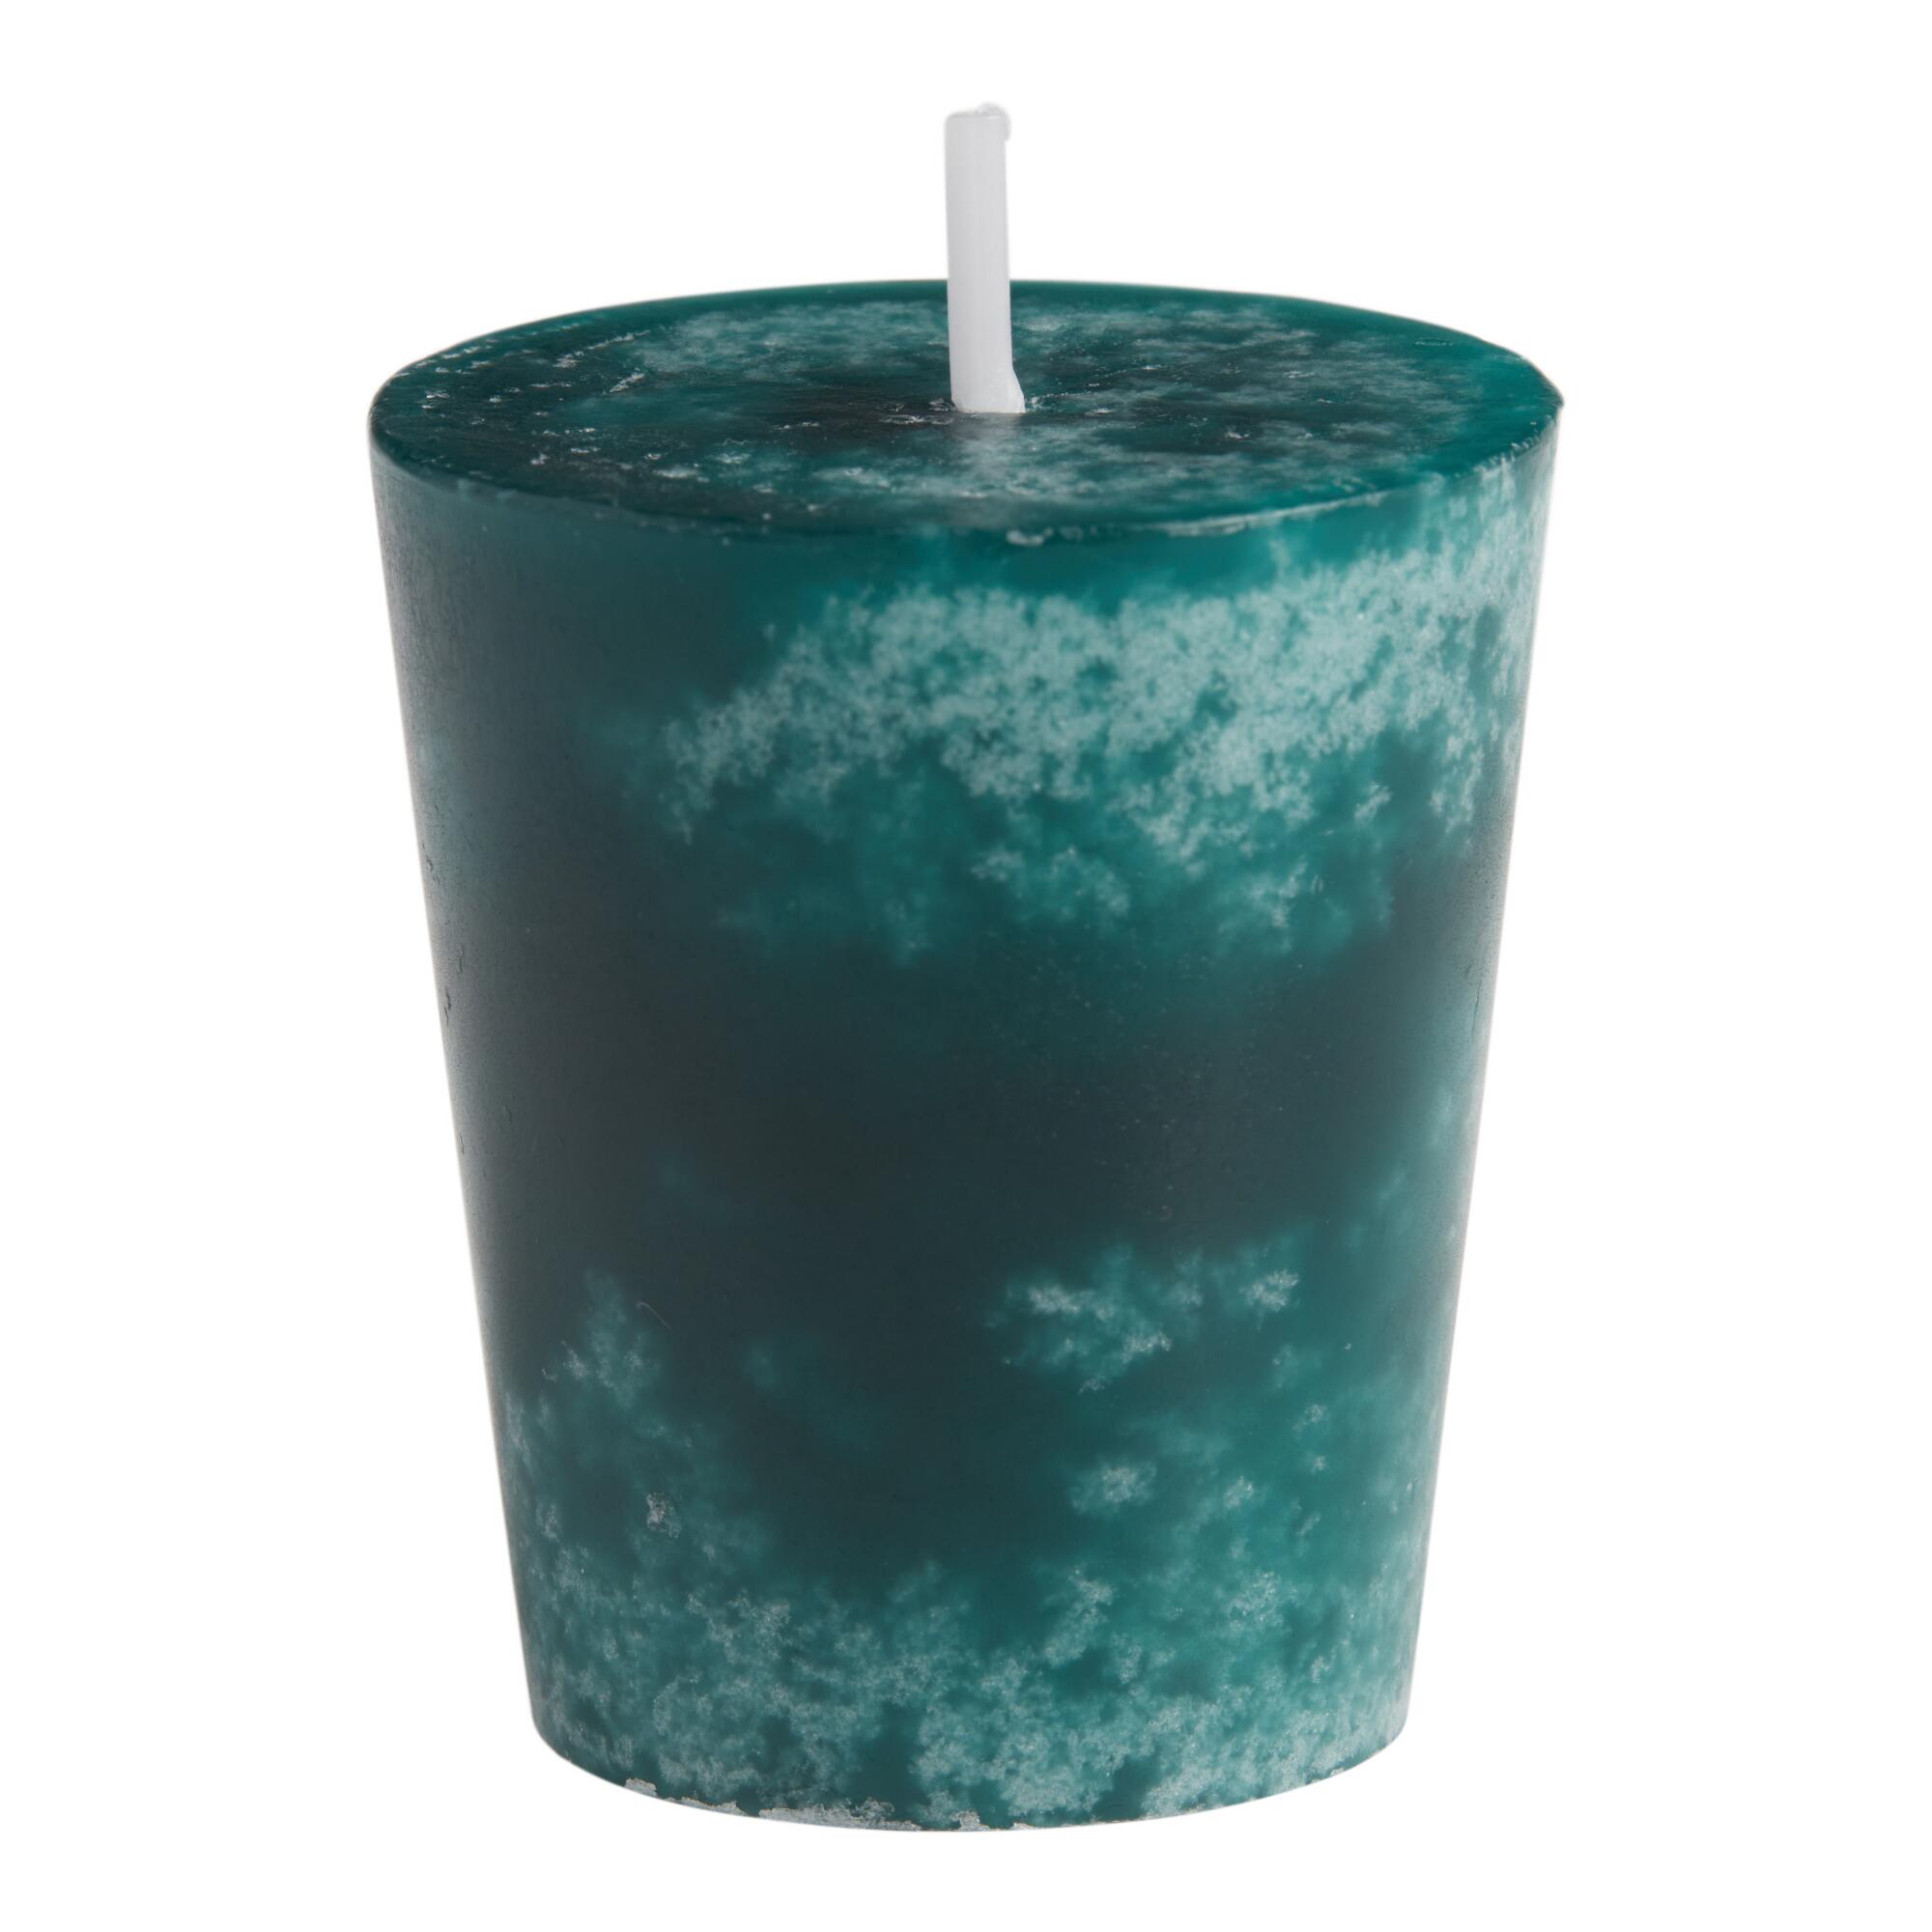 Black Fig Vetiver Mottled Votive Scented Candles 4 Pack: Green - Scented Wax by World Market